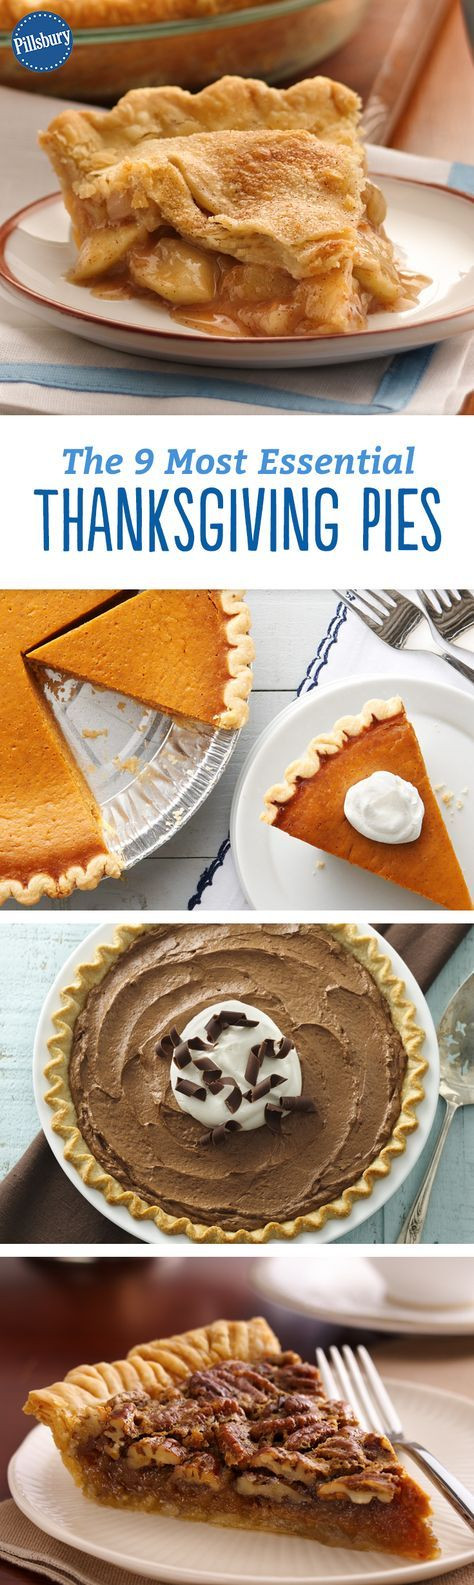 Thanksgiving Desserts 2019
 The 9 Most Essential Thanksgiving Pies in 2019